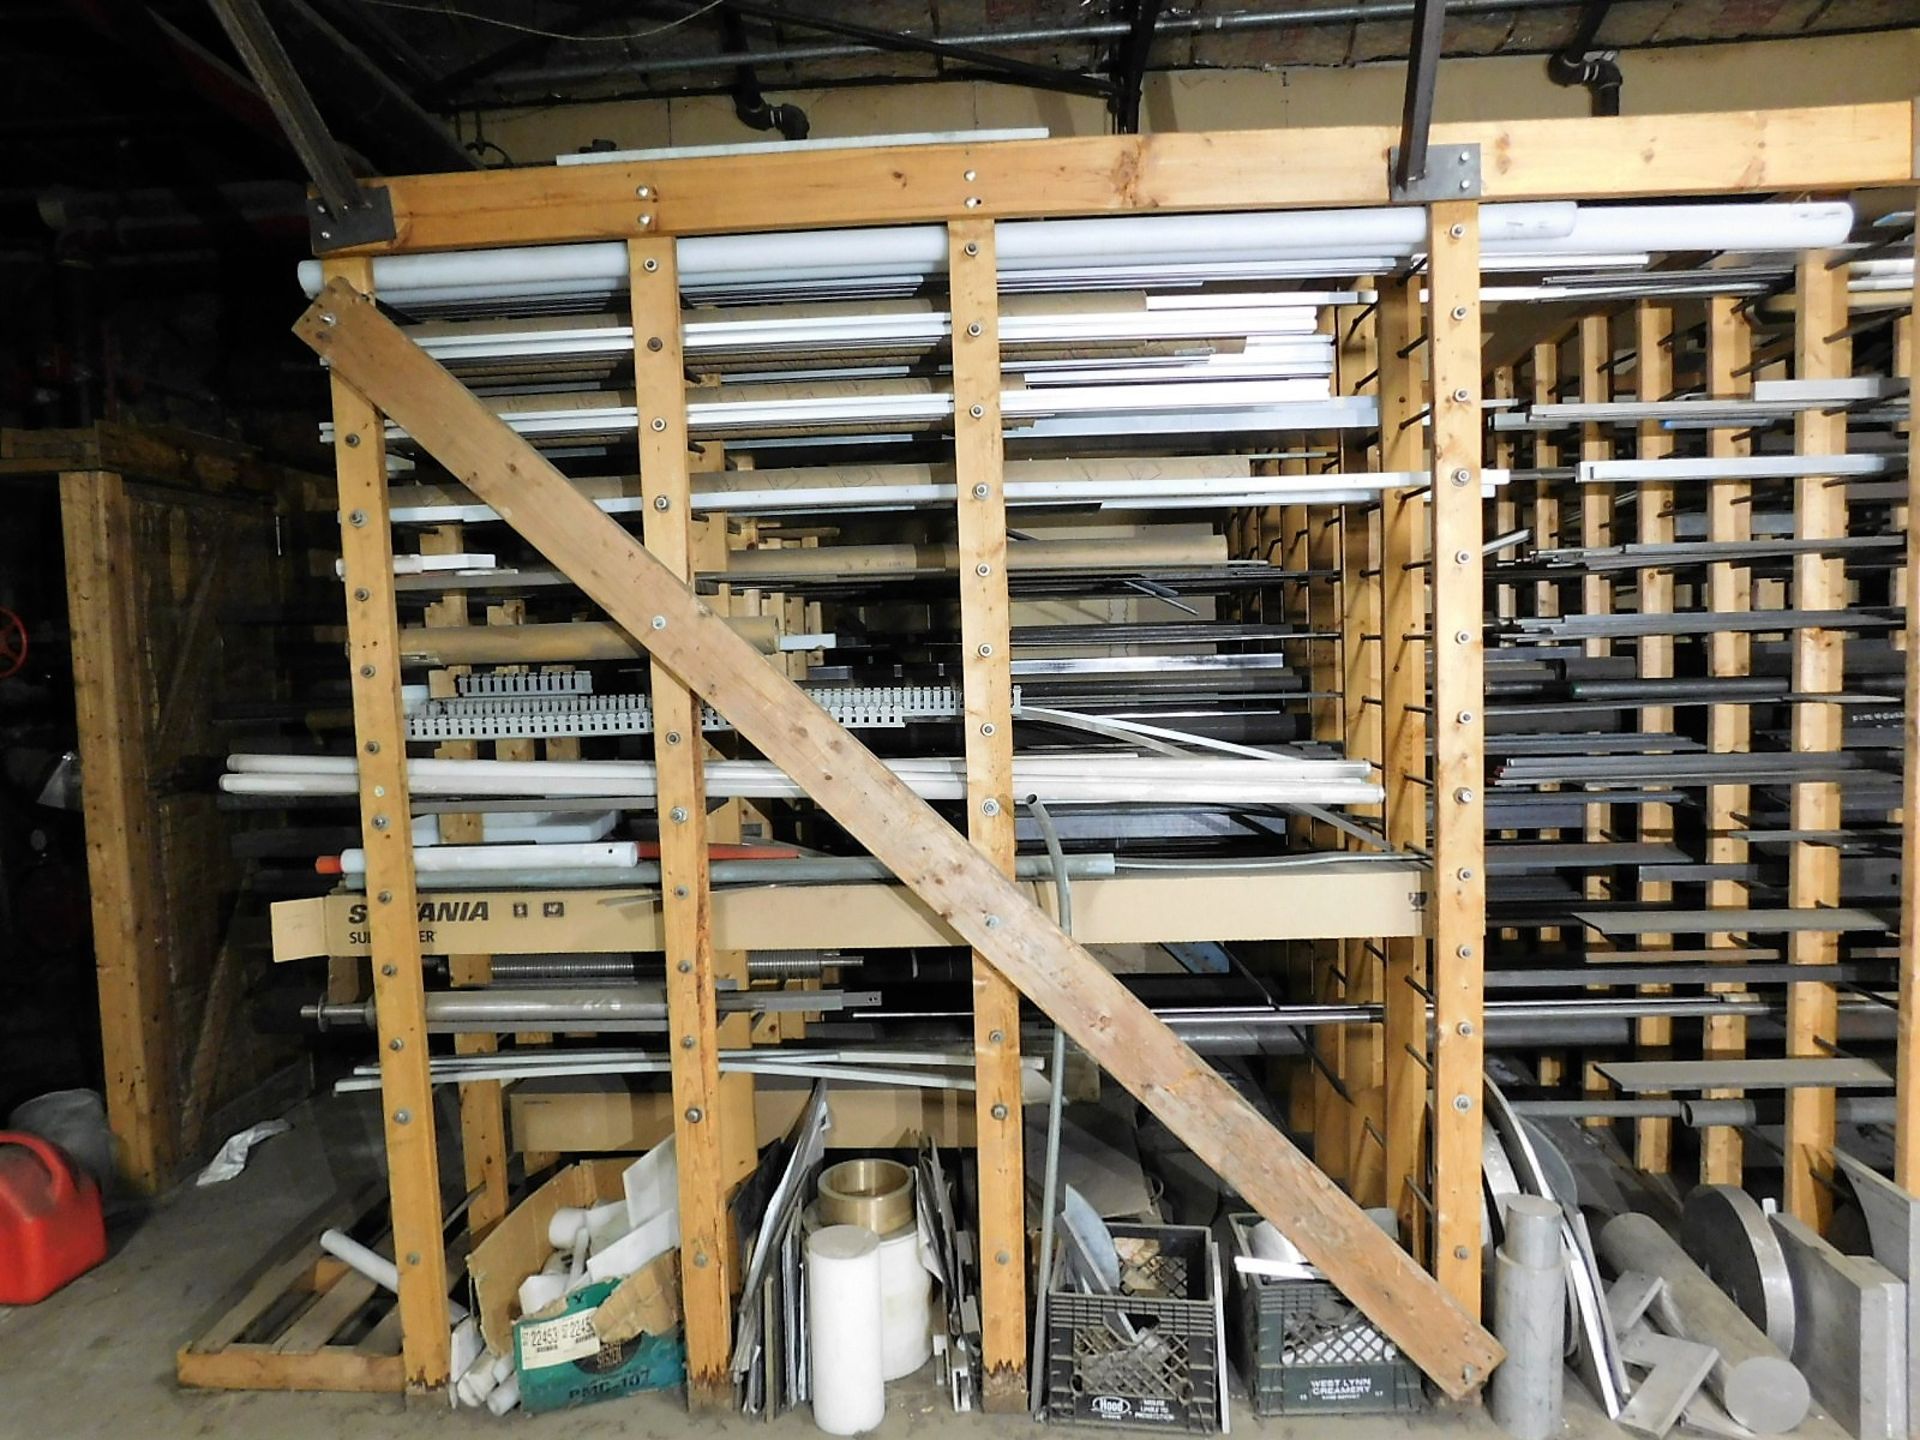 LOT - ENORMOUS QUANTITY OF USEABLE MATERIAL, WITH OR WITHOUT BOLT-TOGETHER RACK. MATERIAL INCLUDES - Image 9 of 12